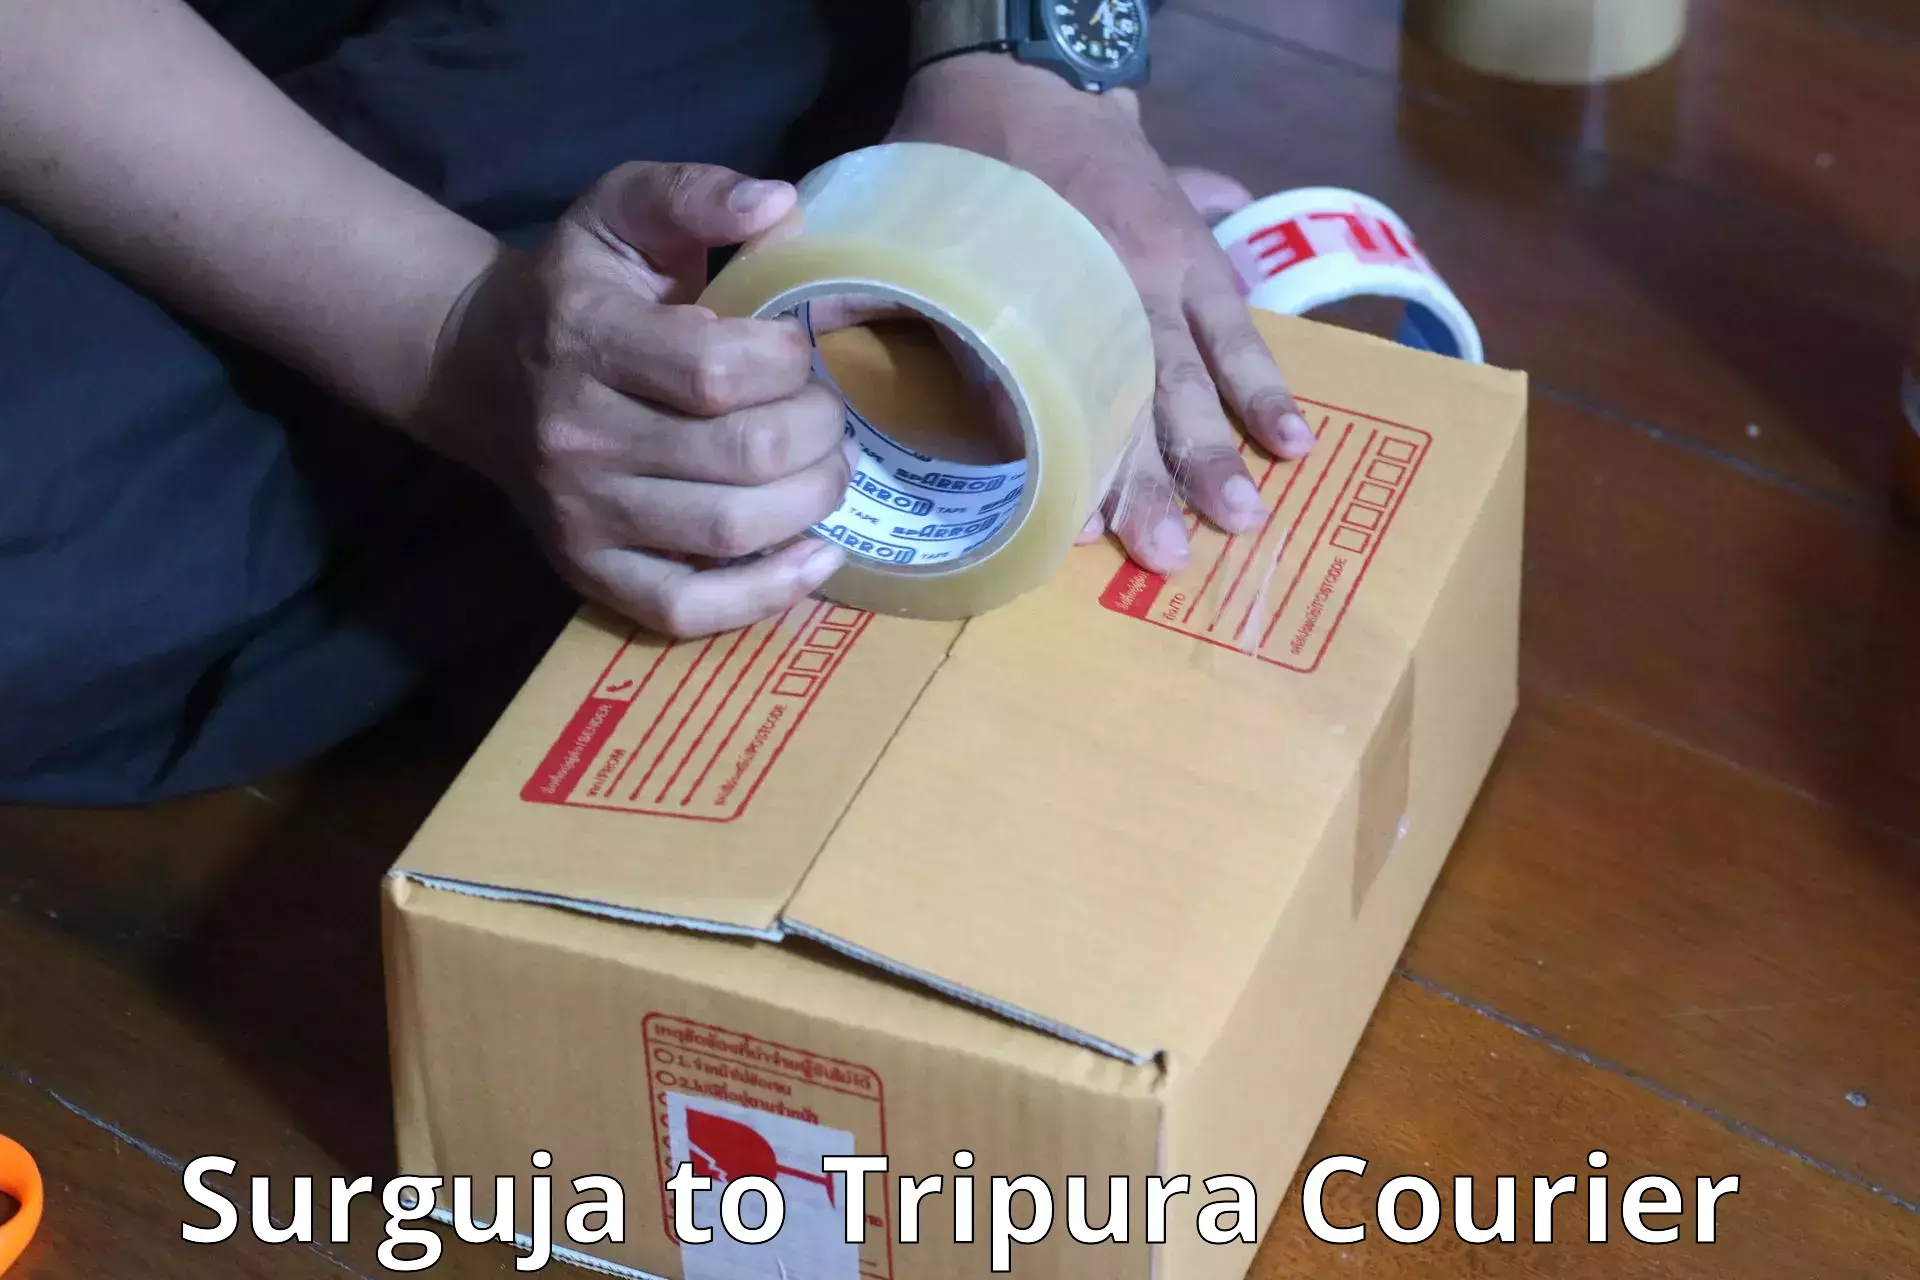 Luggage transport consulting Surguja to Udaipur Tripura